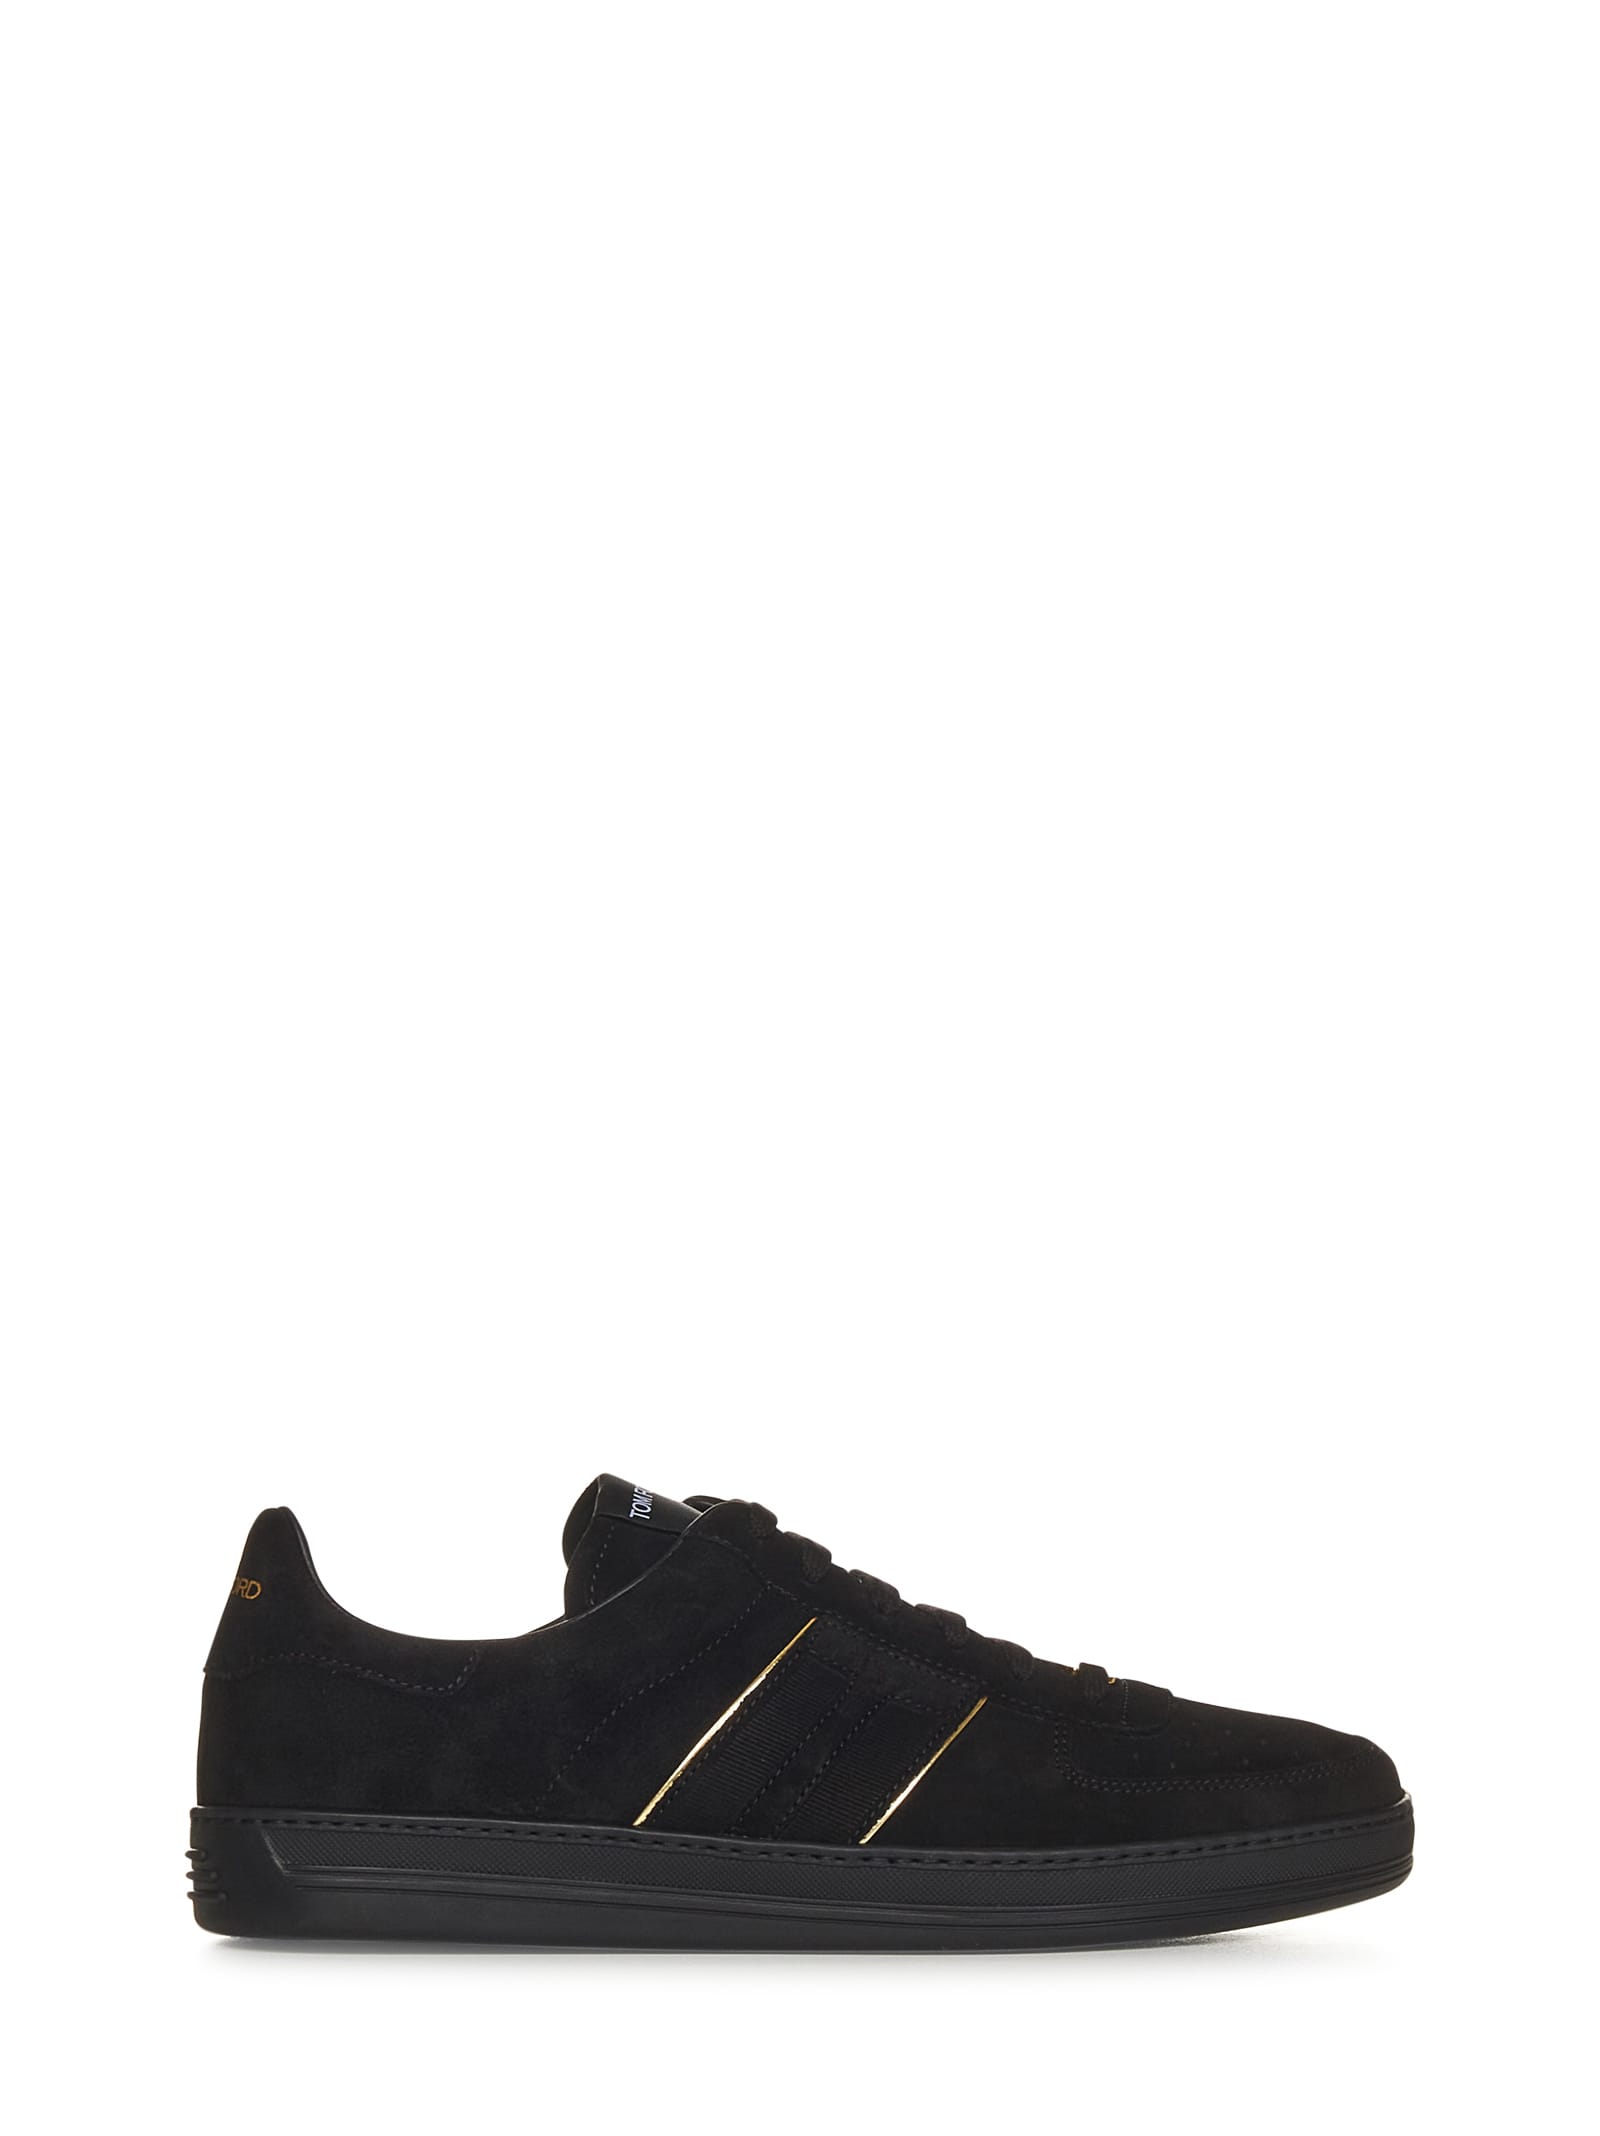 TOM FORD RADCLIFFE SNEAKERS